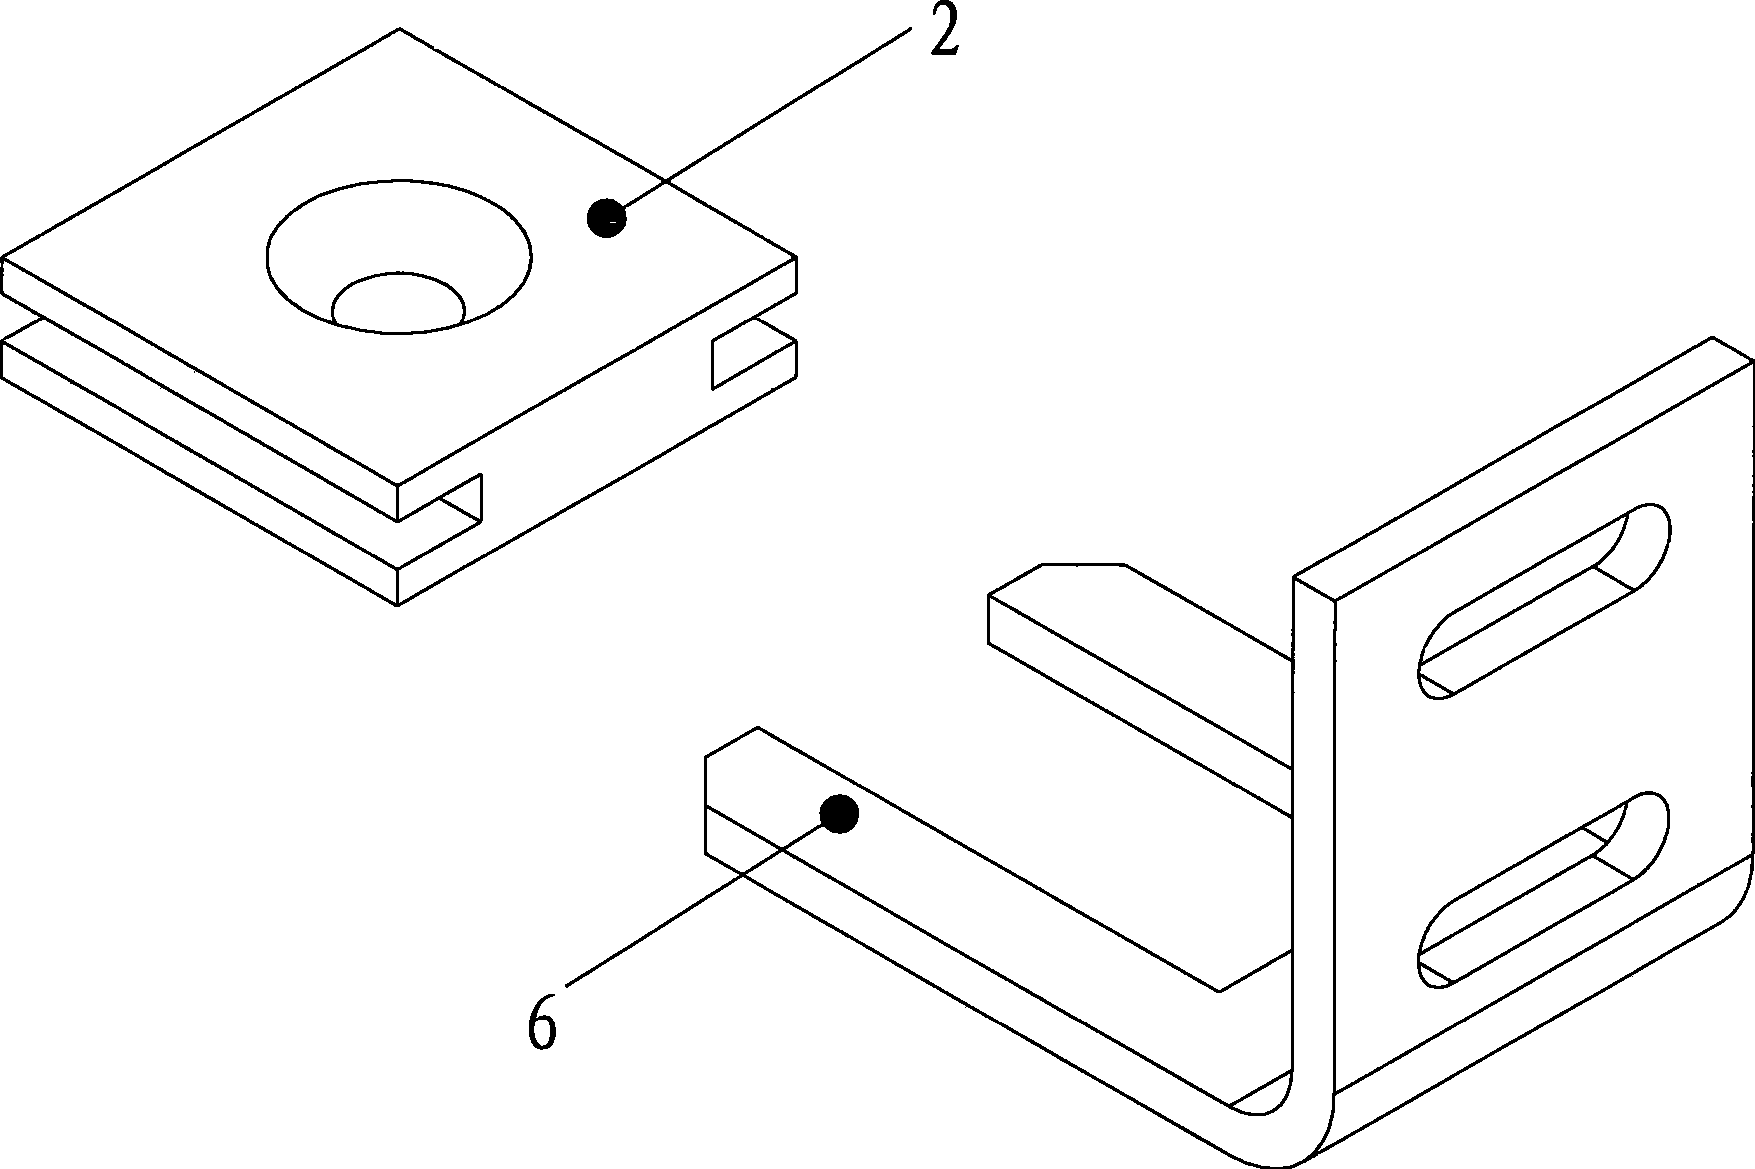 Self-centering mechanism for semiconductor chip